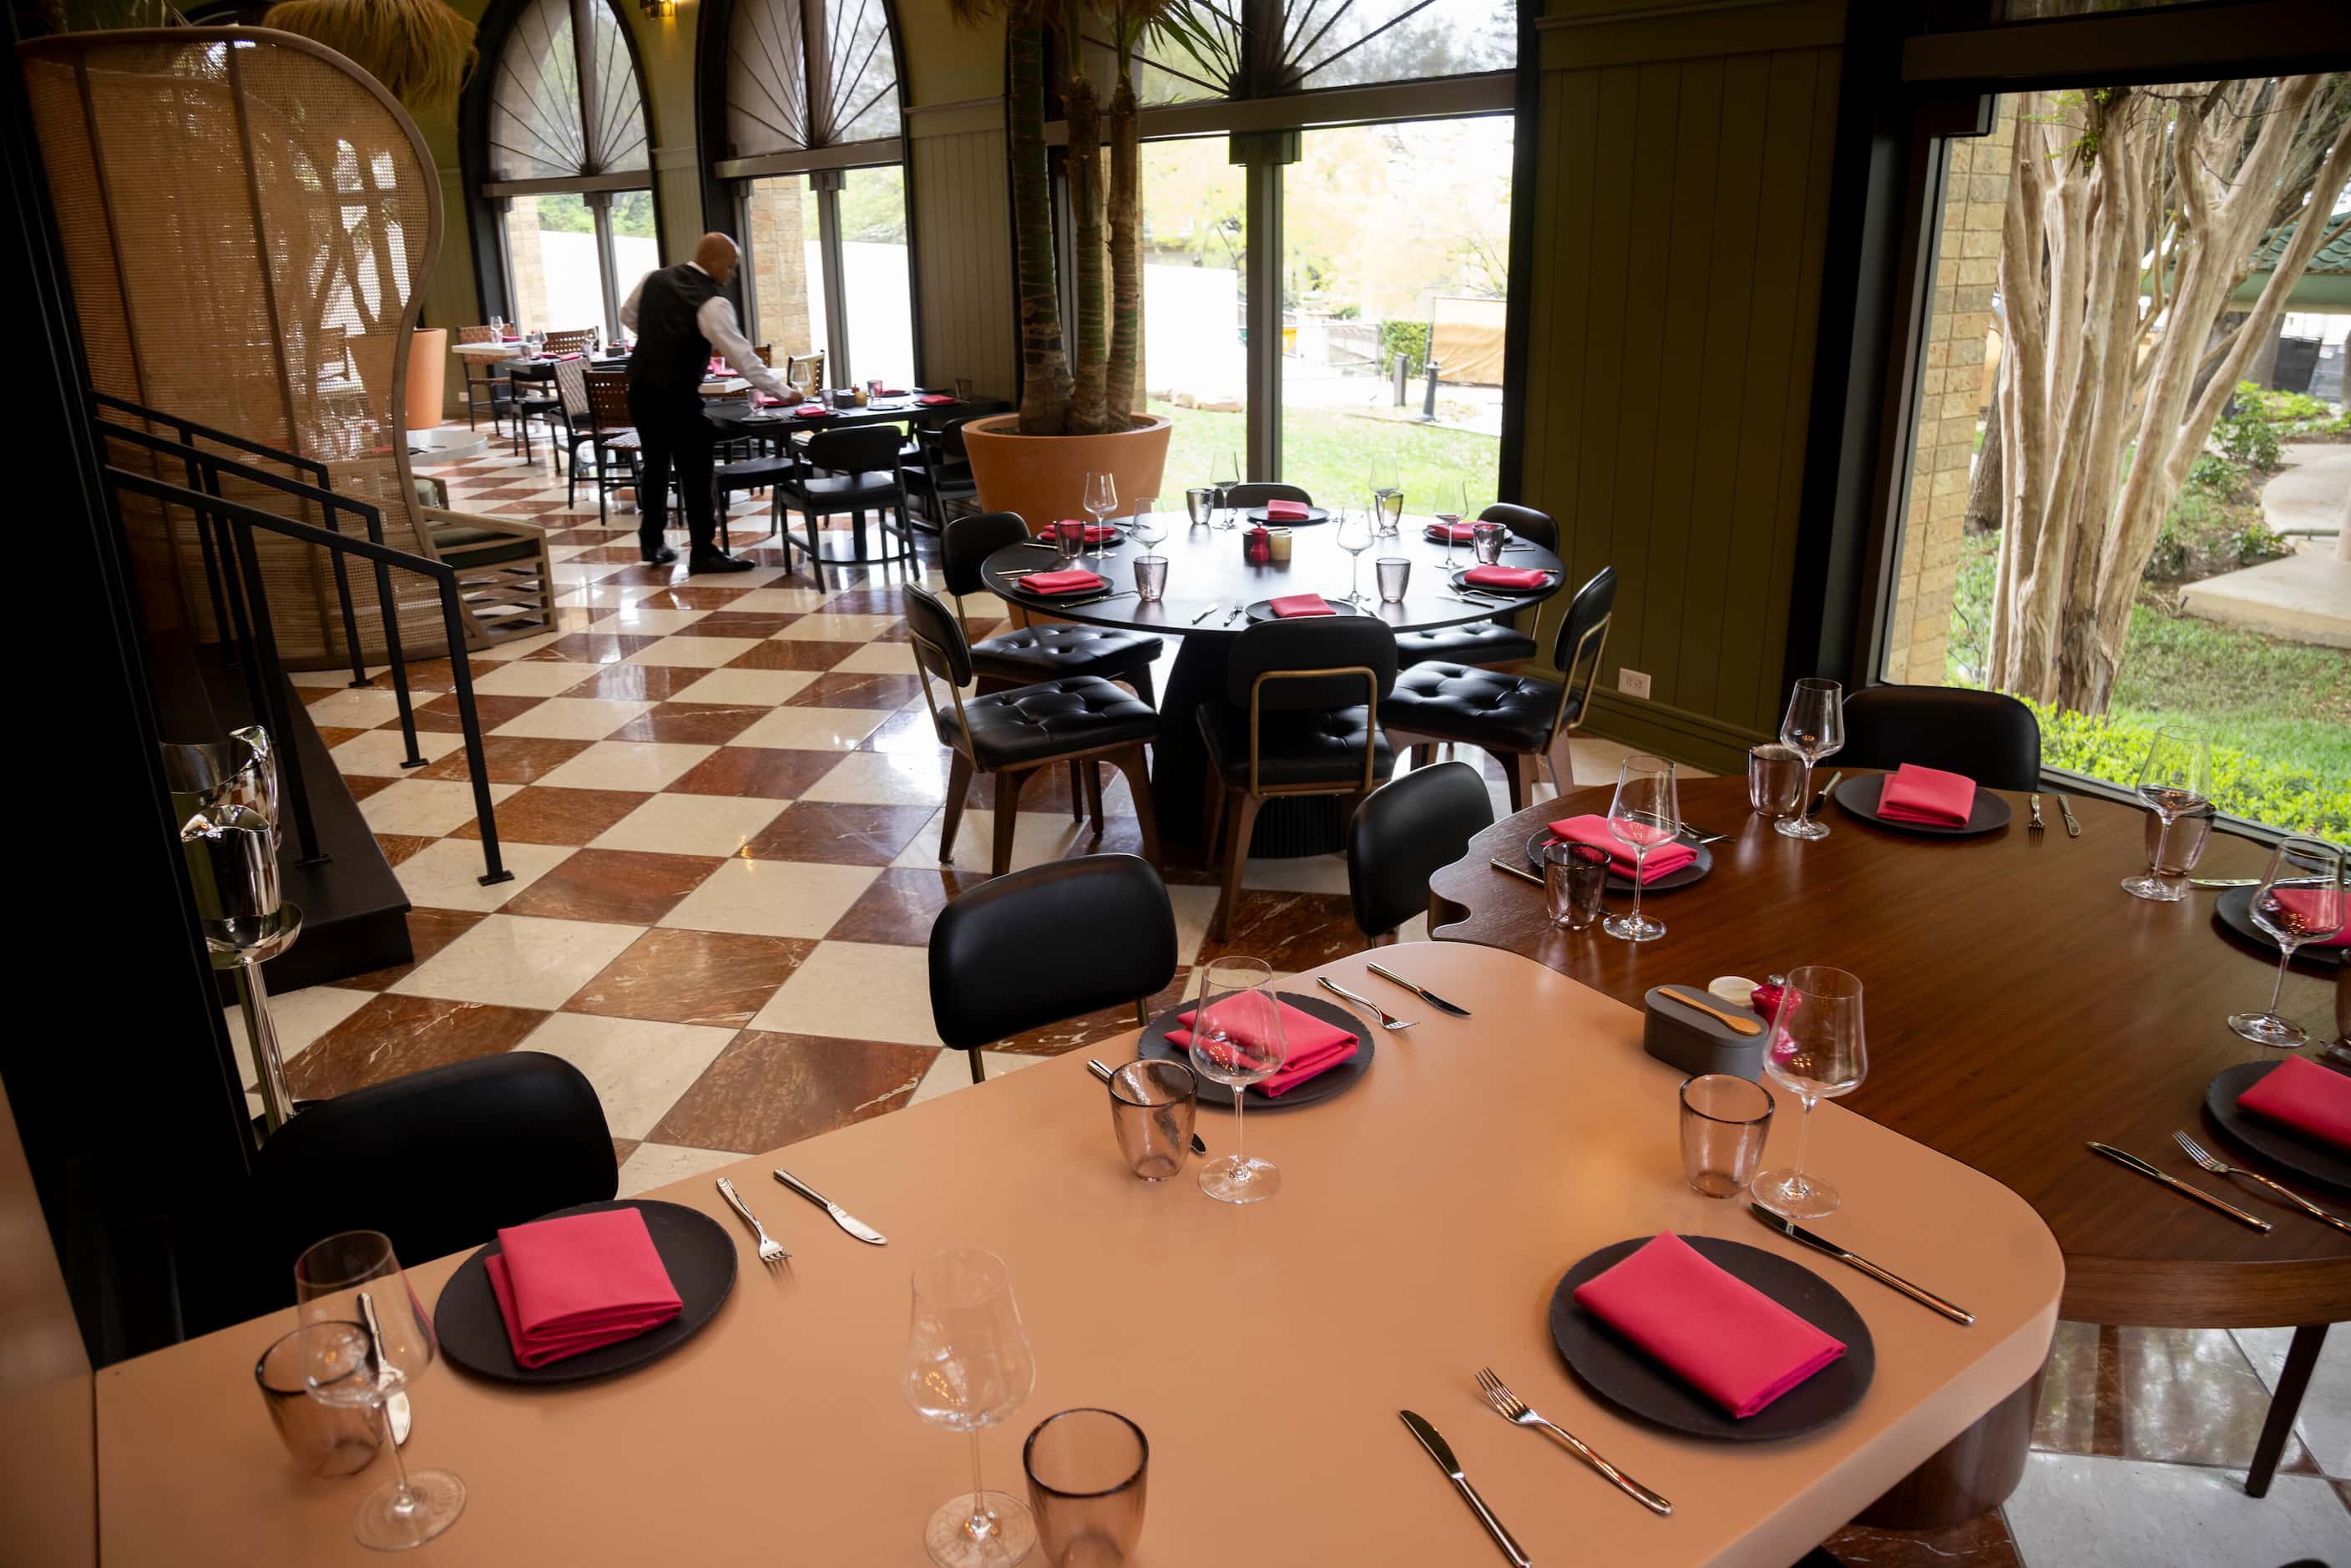 The dining area at Knife Italian is split level. Pink napkins dot the slate-colored plates...